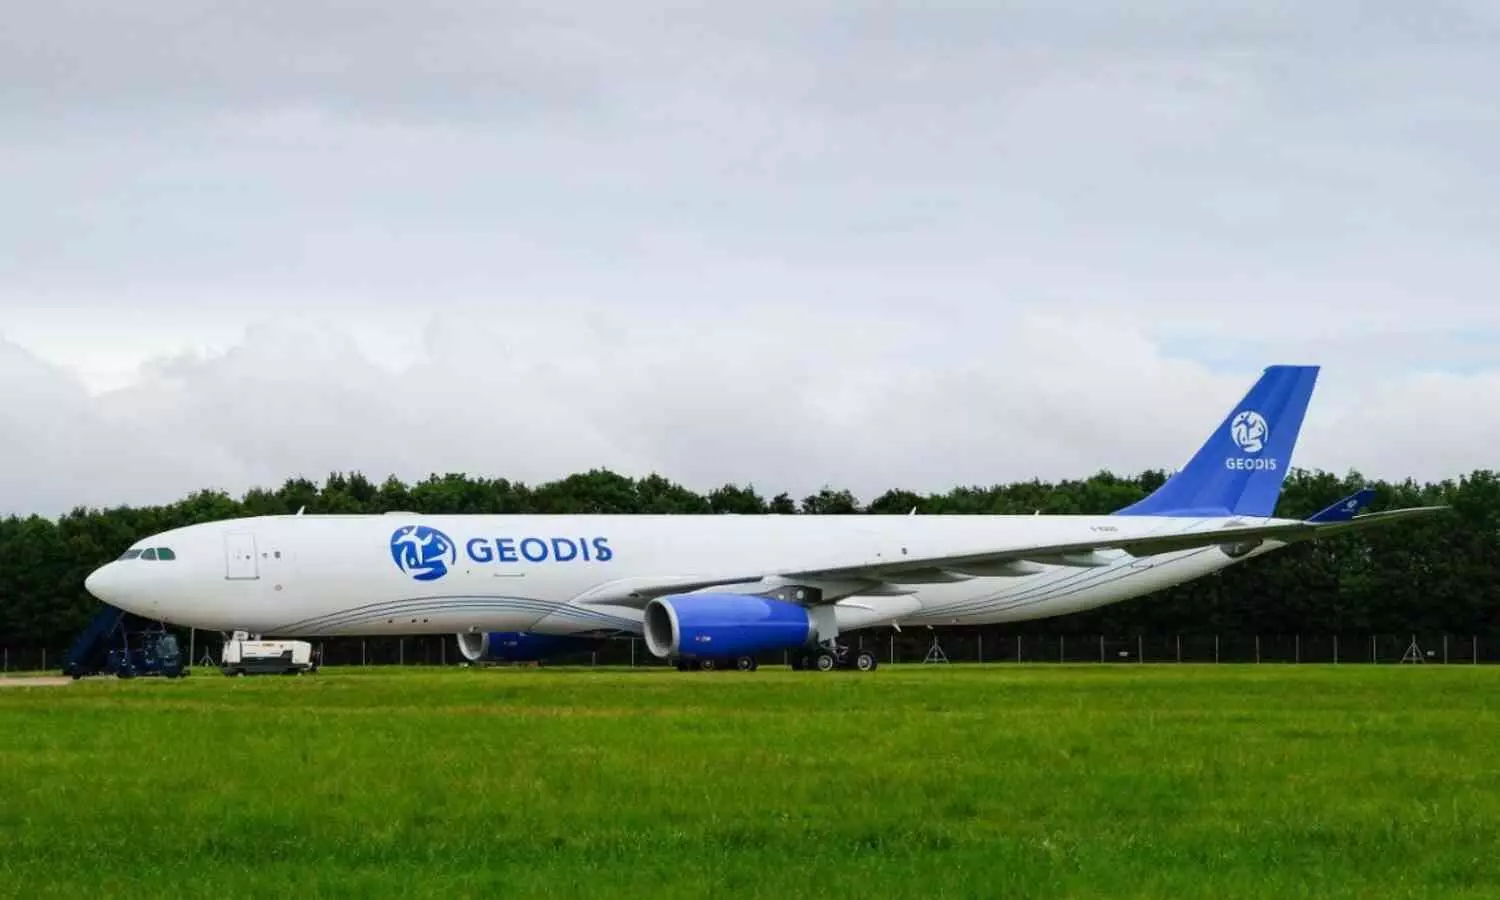 Menzies already provides ramp transport services for intact ULD’s to GEODIS at the airport